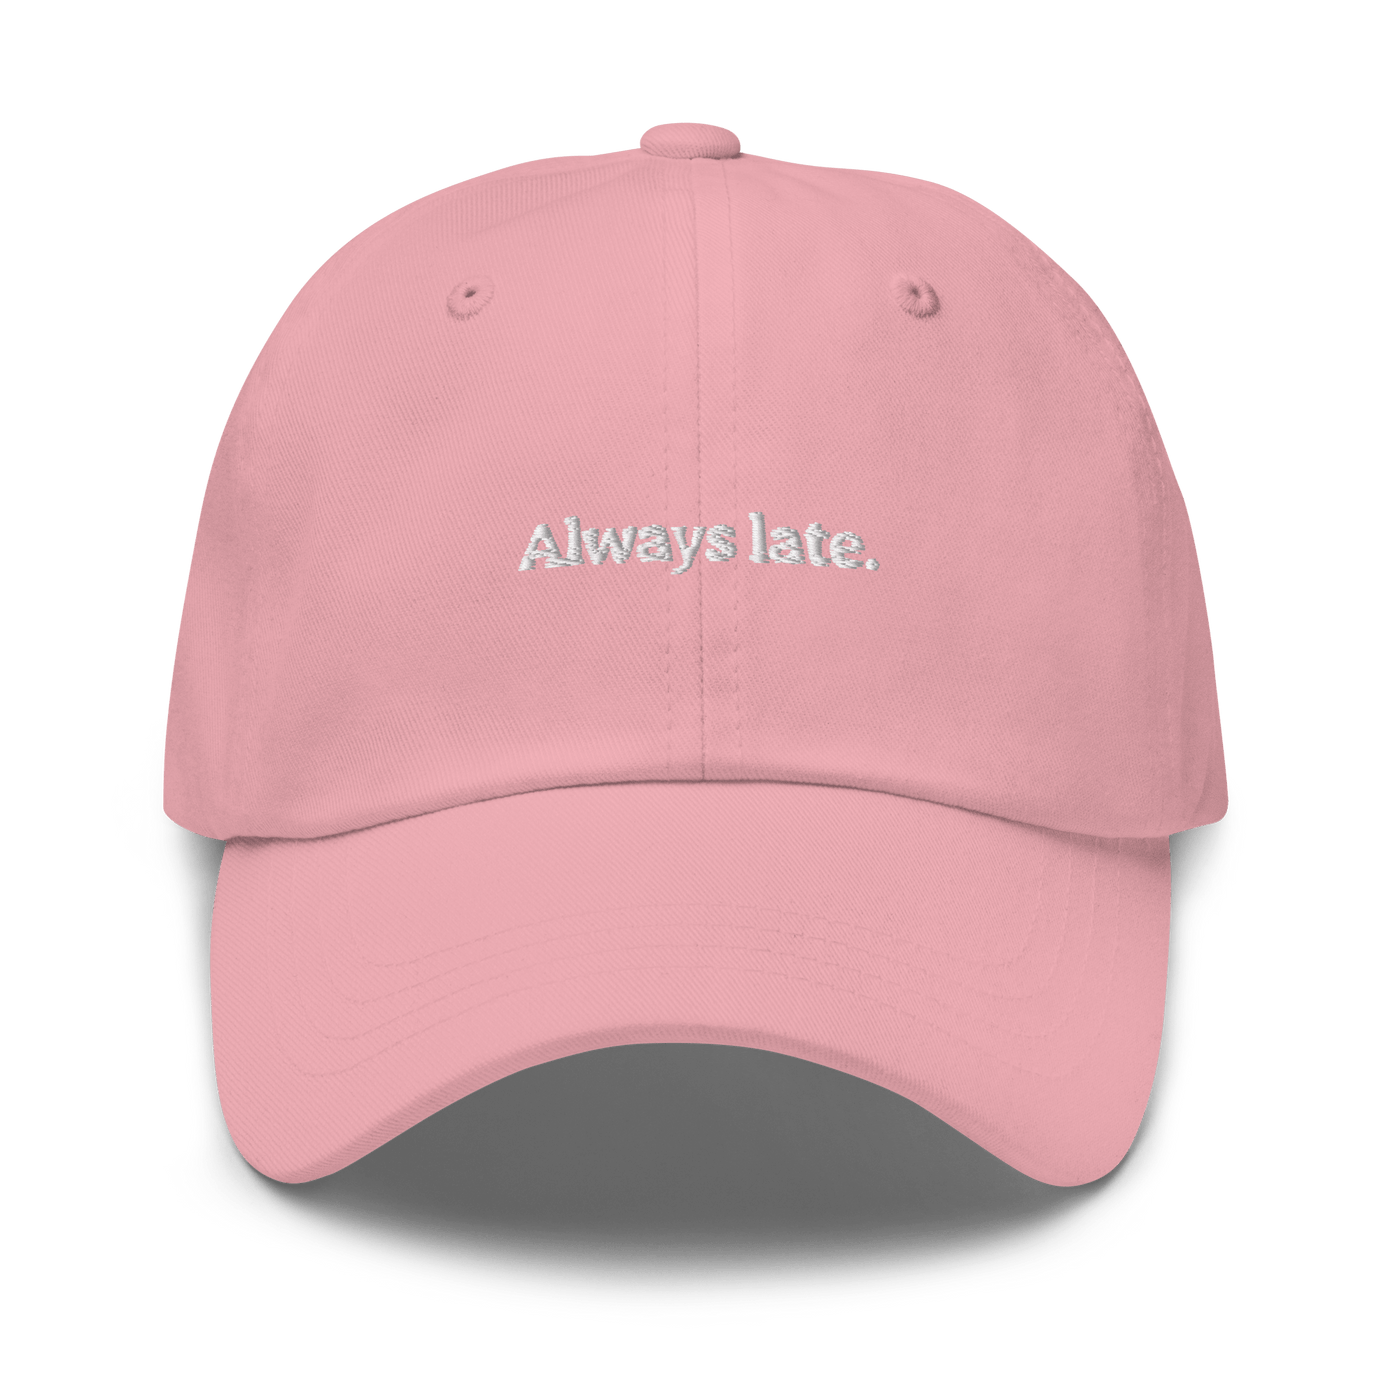 Always Late. Dad hat - Pink - - Just Another Cap Store